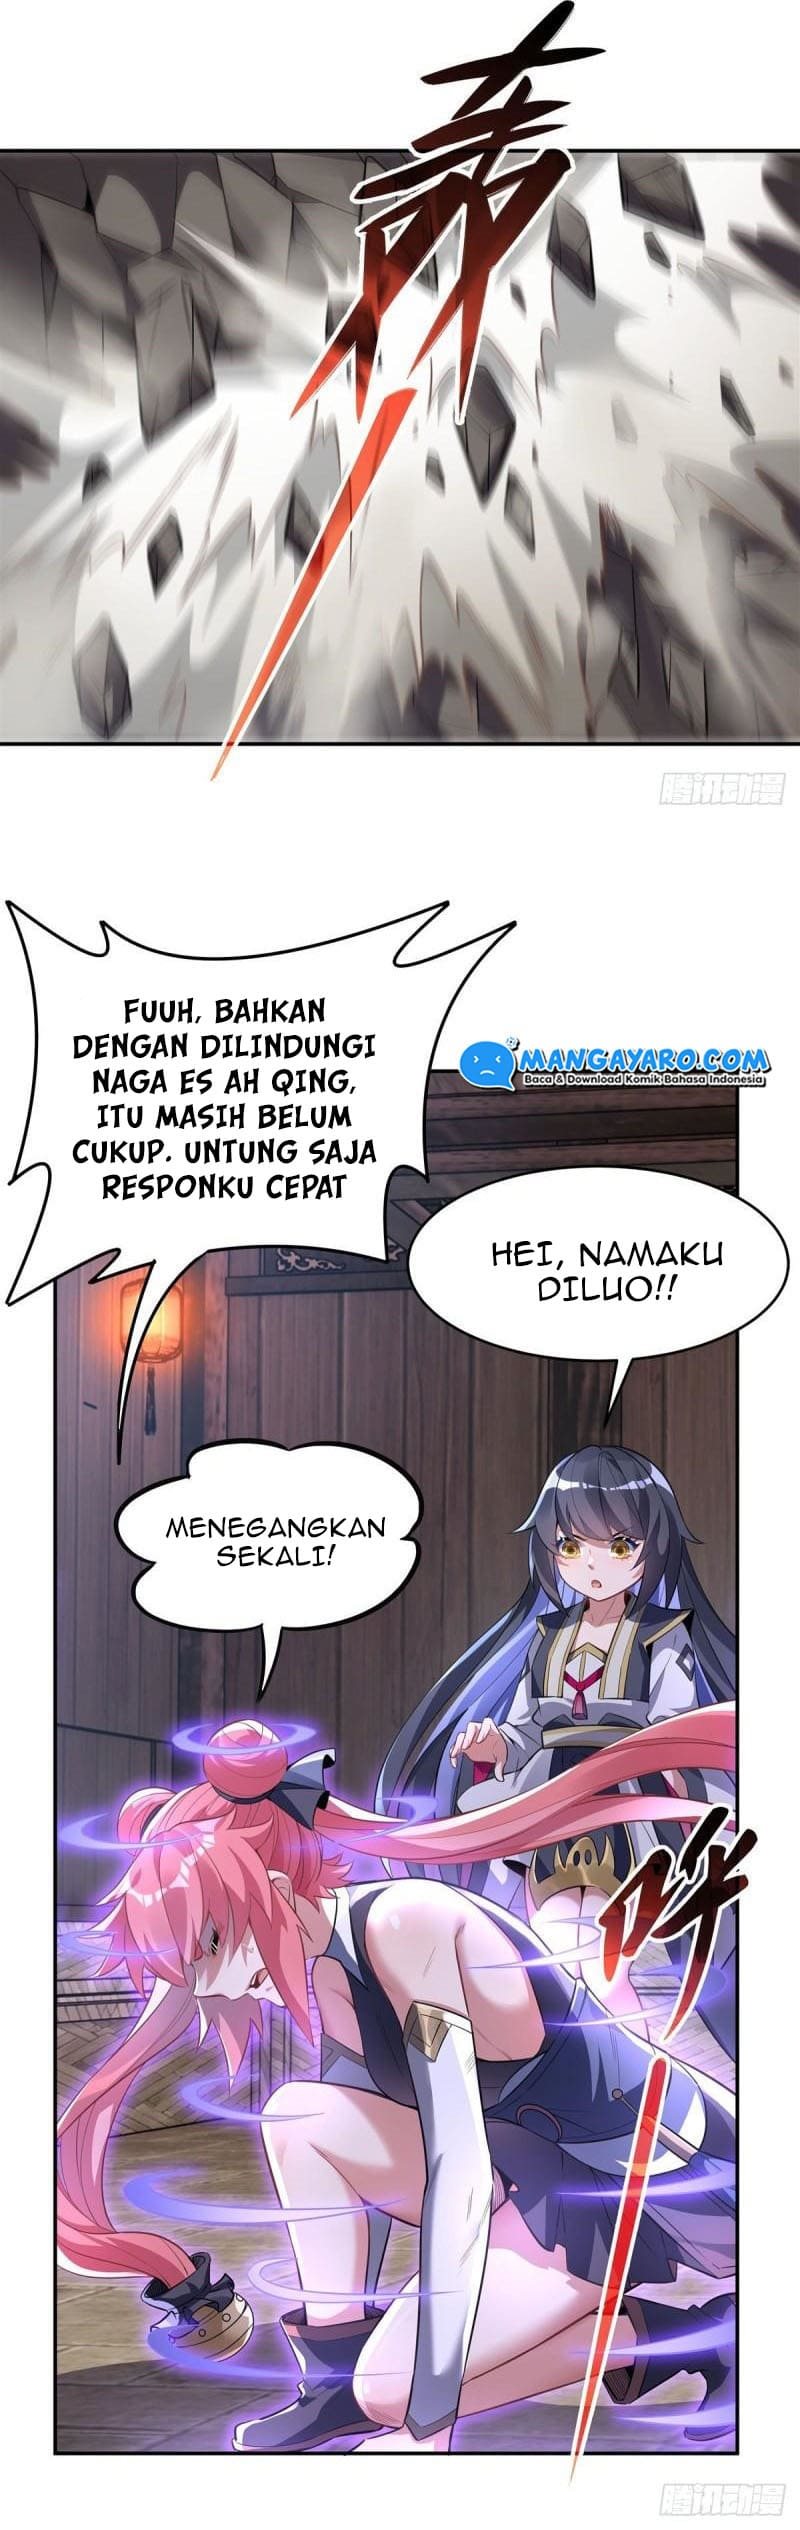 Dilarang COPAS - situs resmi www.mangacanblog.com - Komik my female apprentices are all big shots from the future 065 - chapter 65 66 Indonesia my female apprentices are all big shots from the future 065 - chapter 65 Terbaru 9|Baca Manga Komik Indonesia|Mangacan